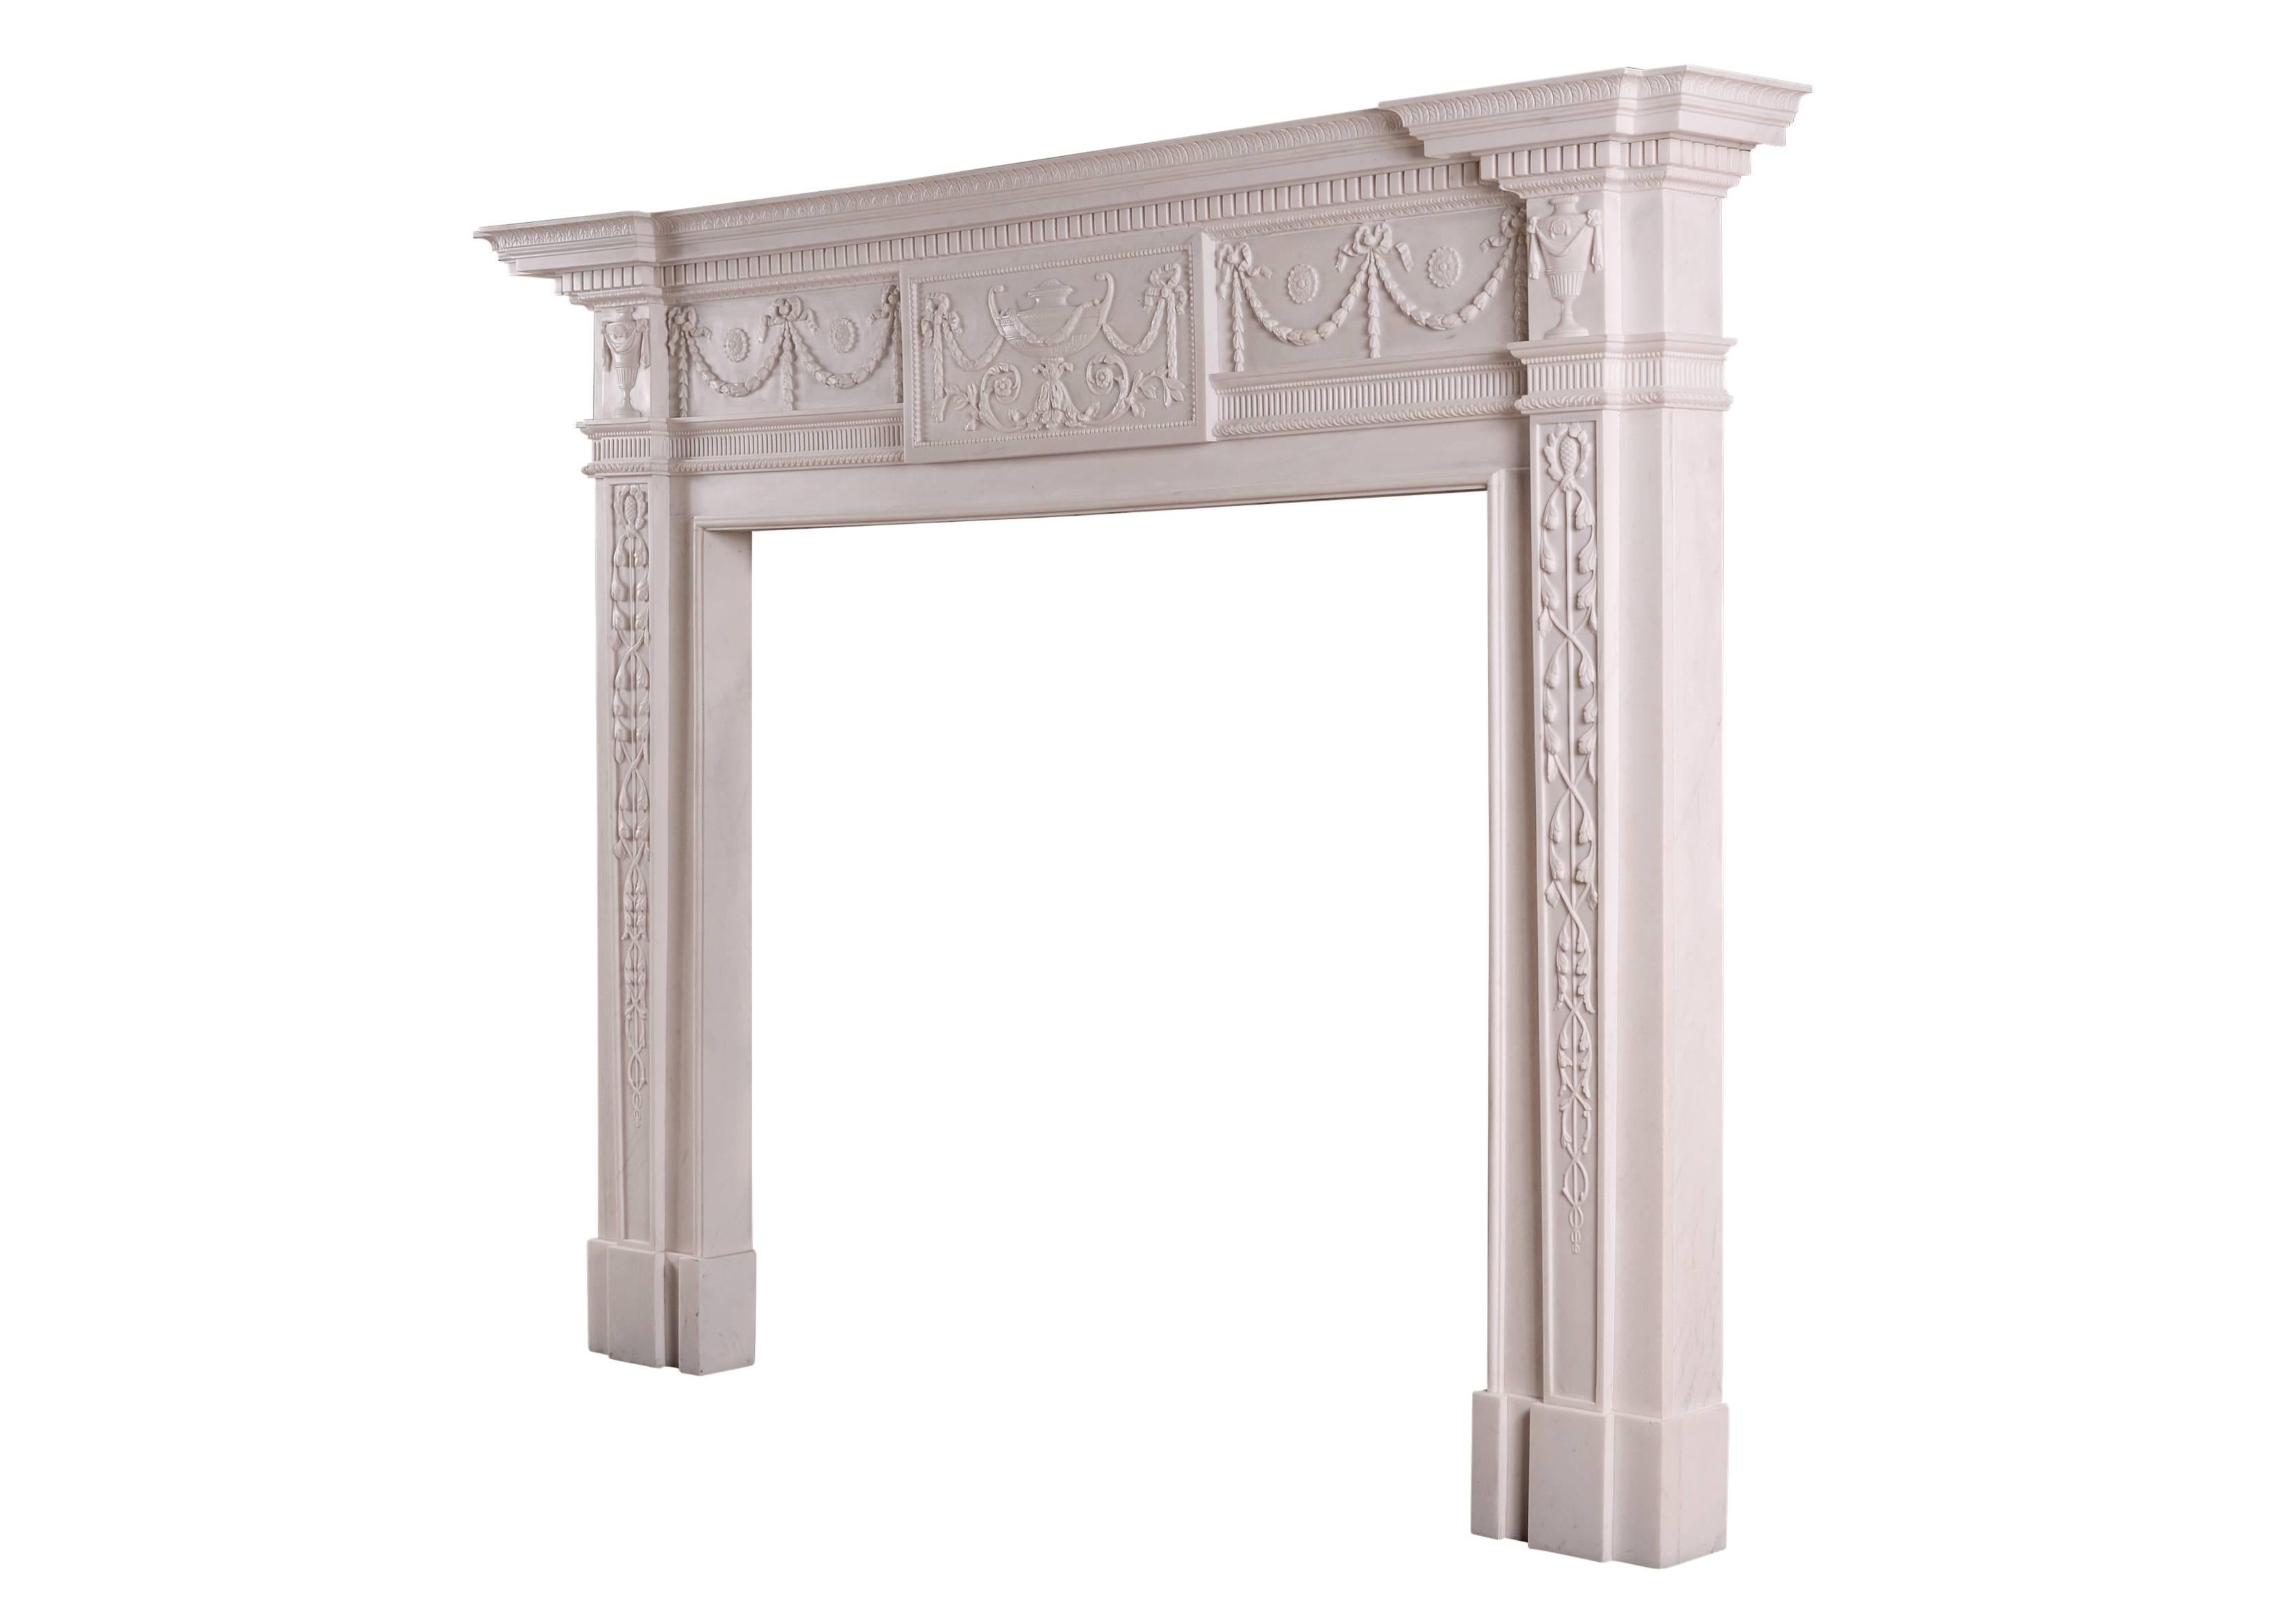 A fine quality English white marble fireplace in the late 18th century Robert Adam style. The frieze with carved centre block featuring urn and foliage with tied ribbons, the side panels with husks and drops connected with tied ribbons. The jambs